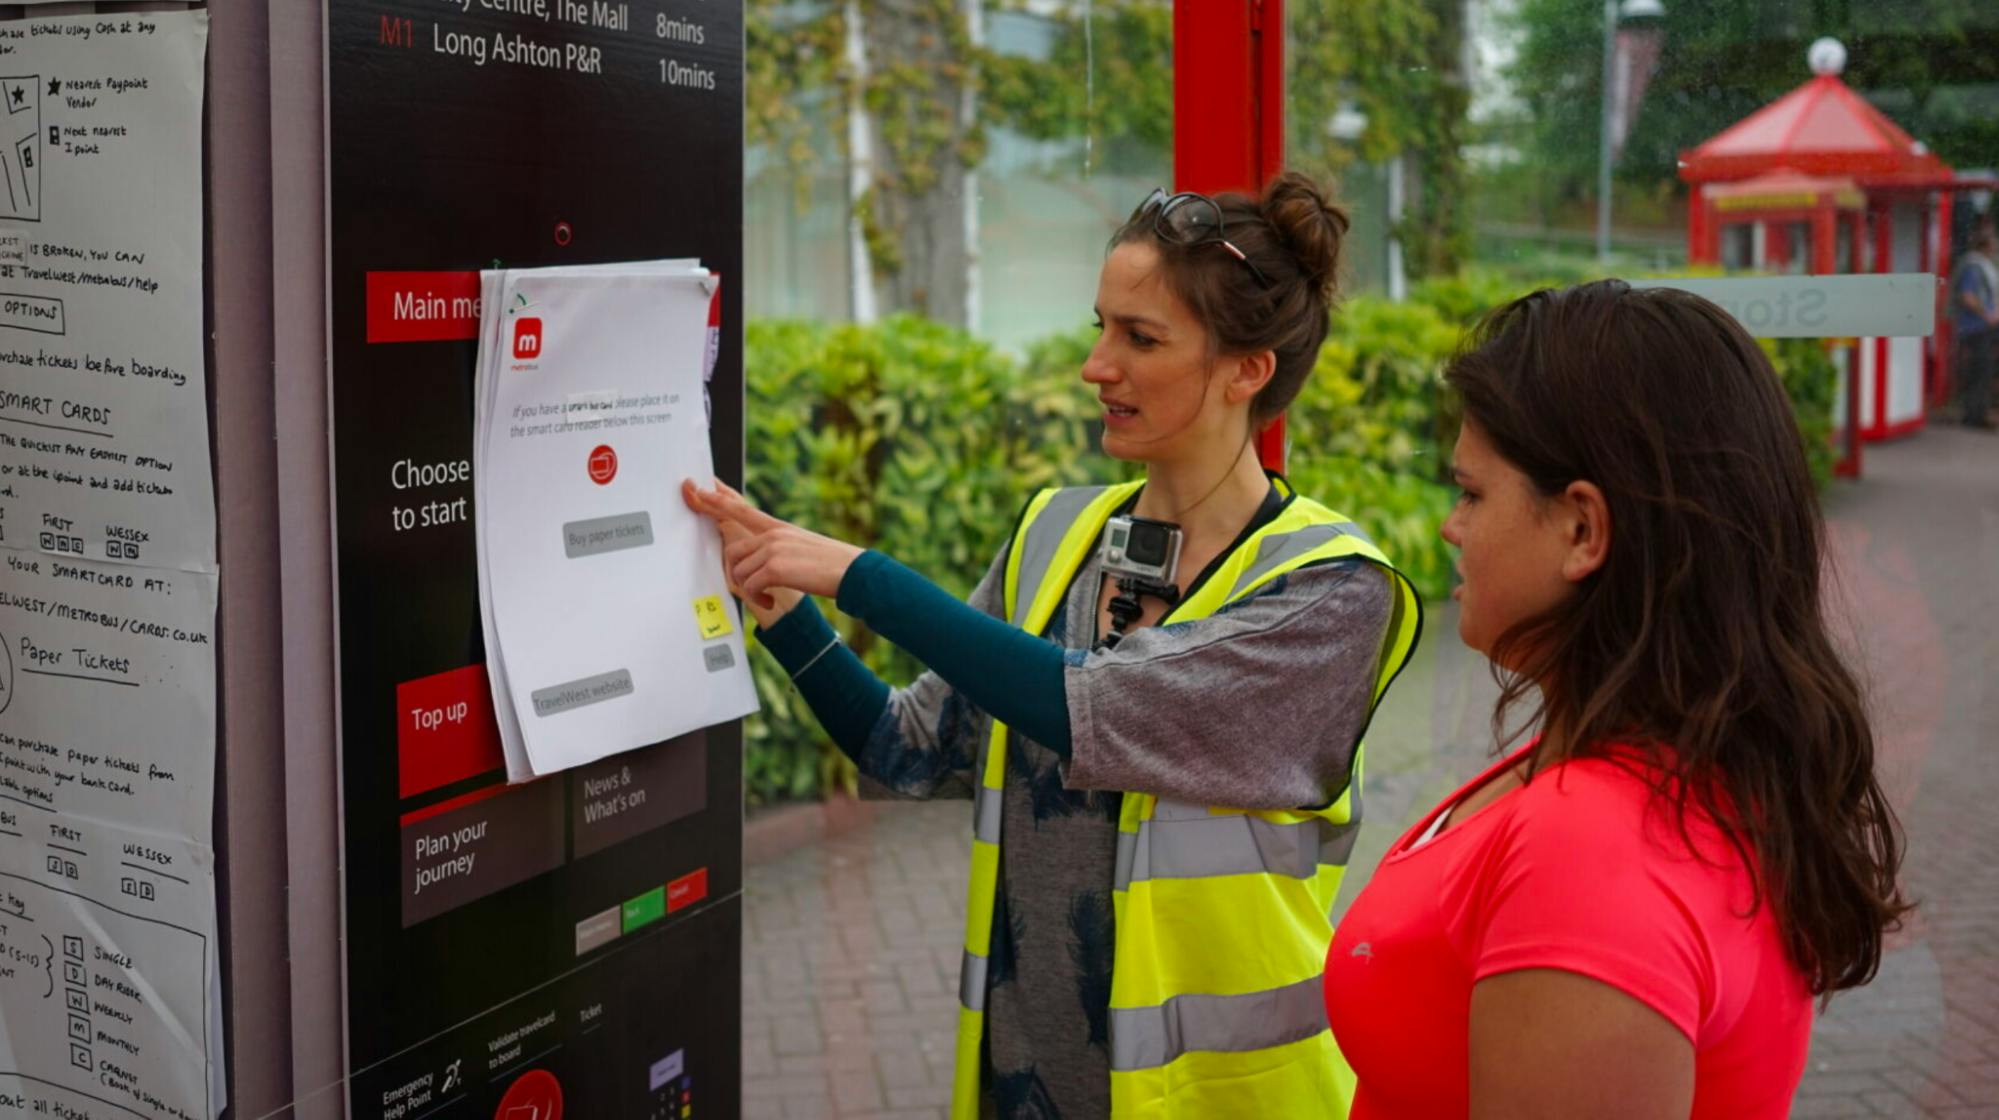 A photo of Anna at a bus stop holding up an A3 piece of paper with ticket purchasing options on, getting feedback from people who use the bus.